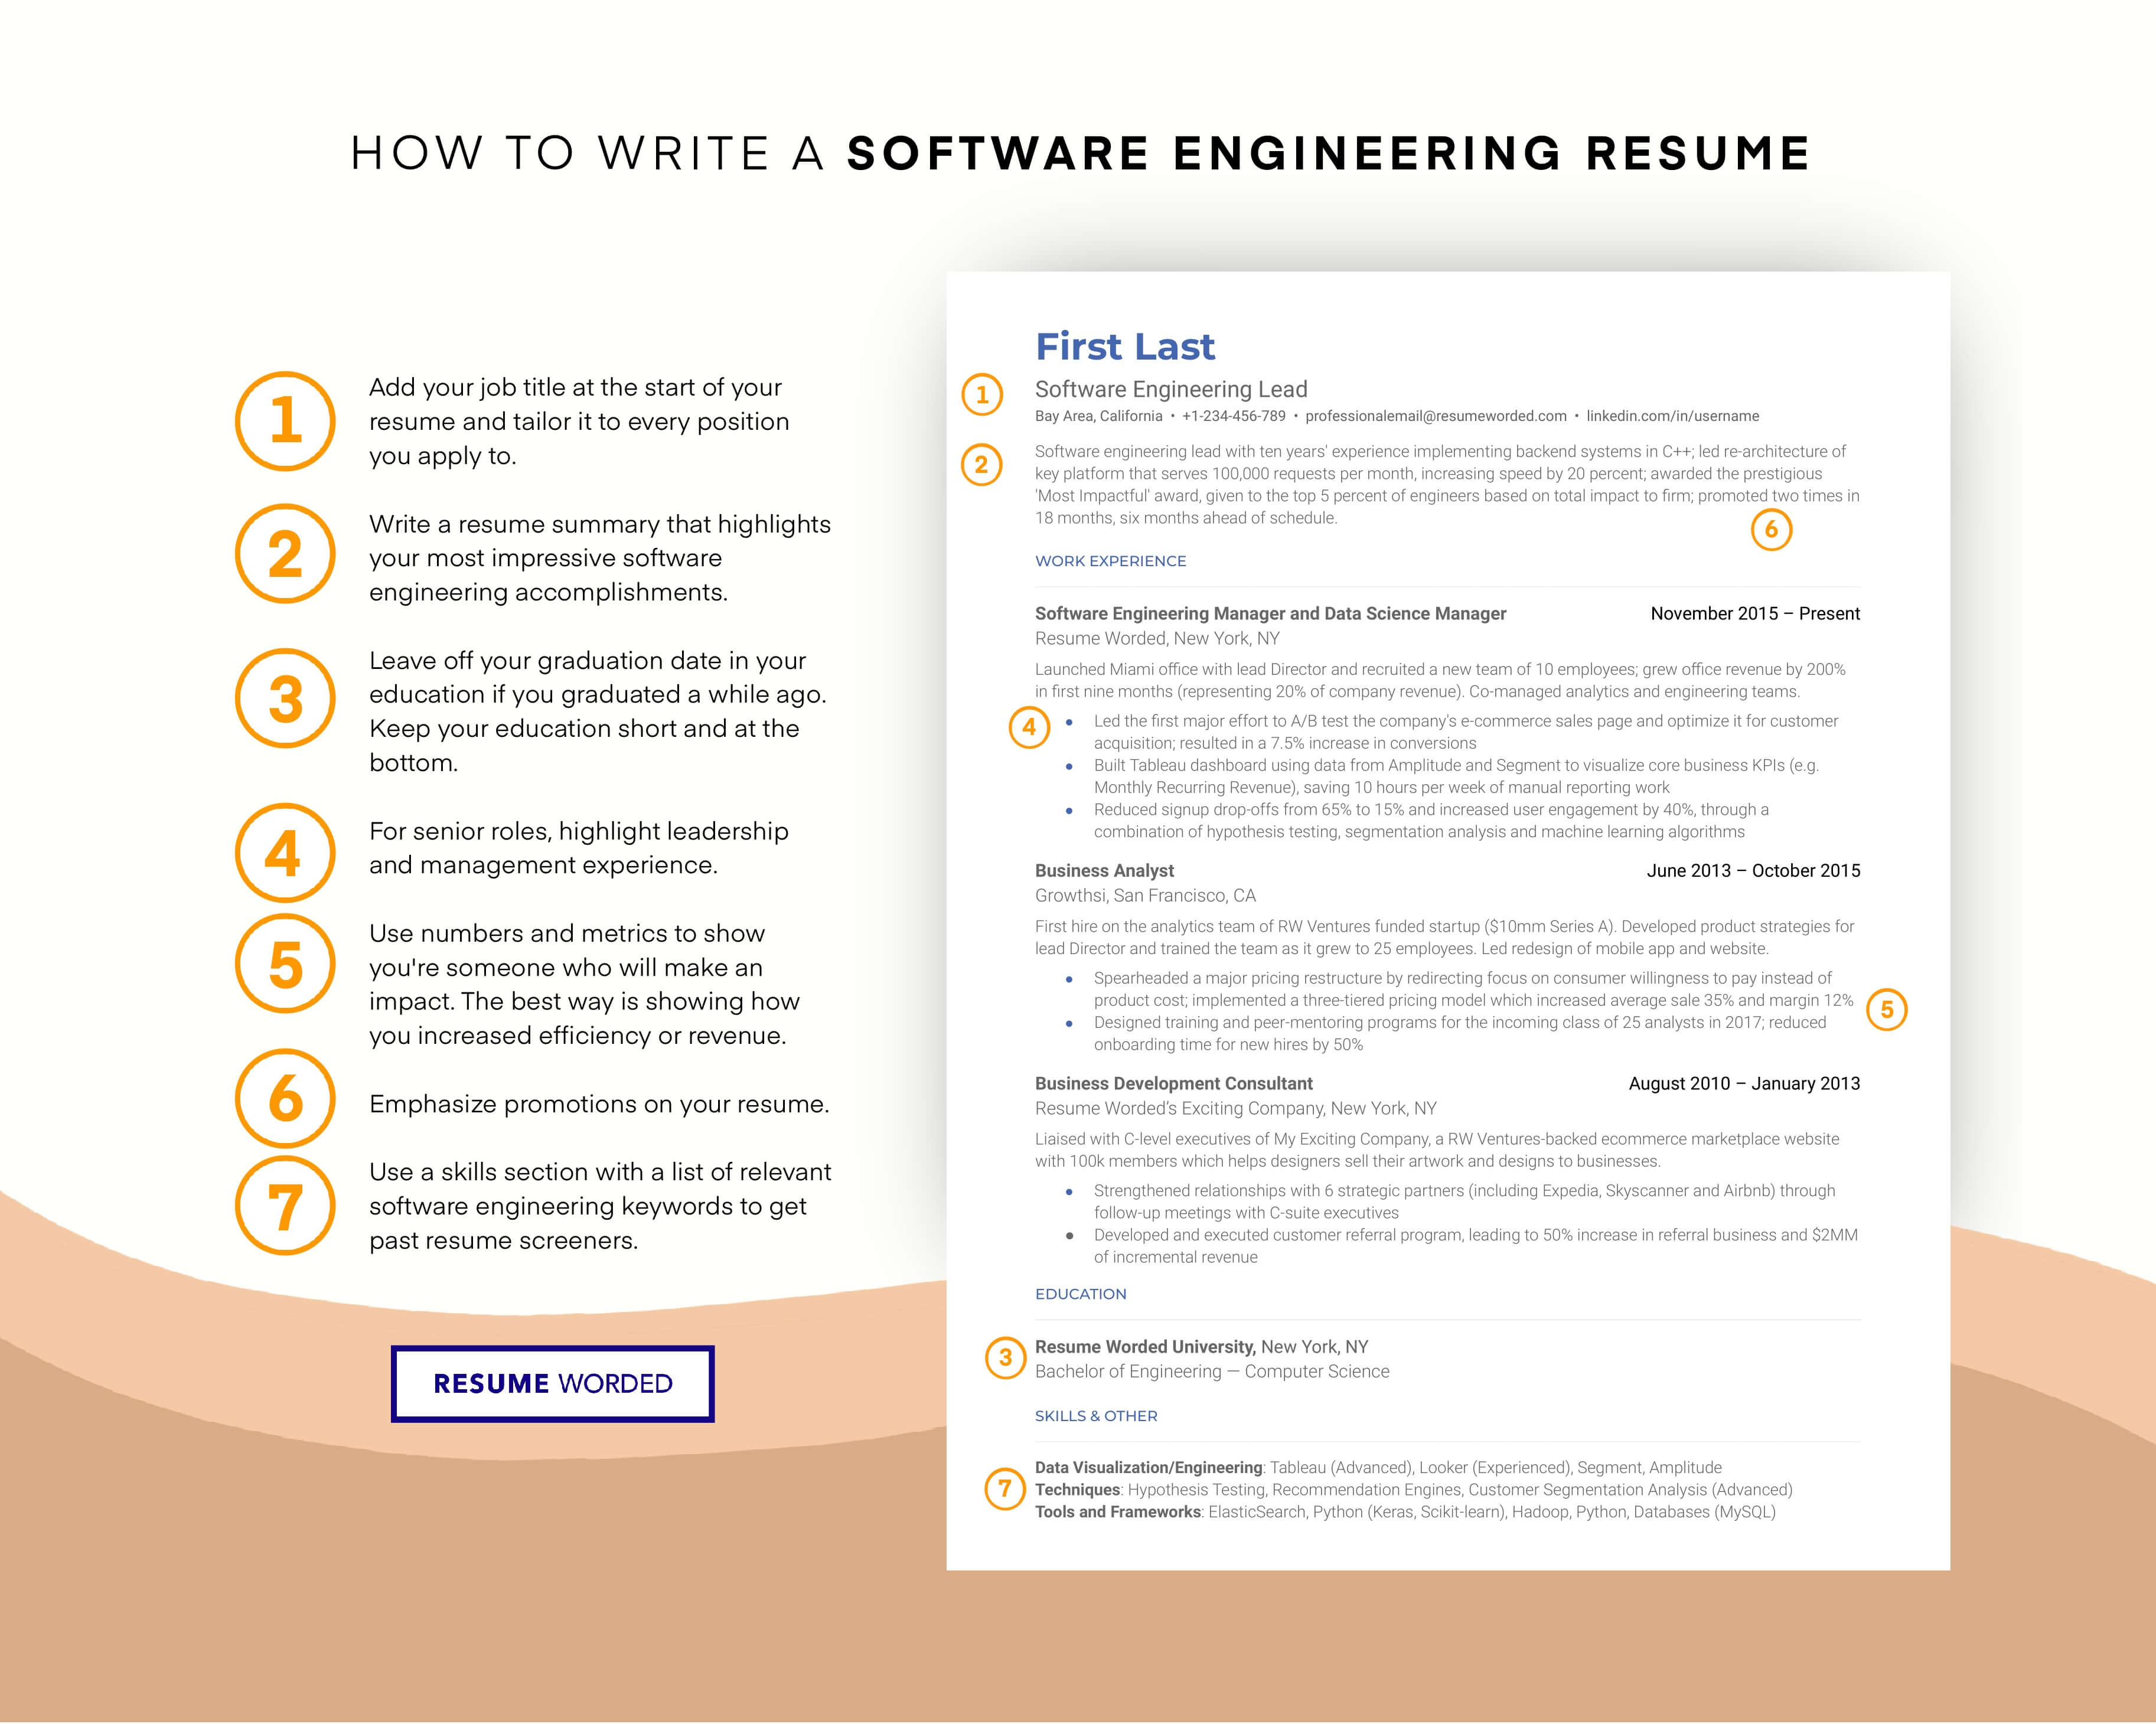 Highlight your experience with relevant mechanical engineering software and tools - Mechanical Engineer Resume